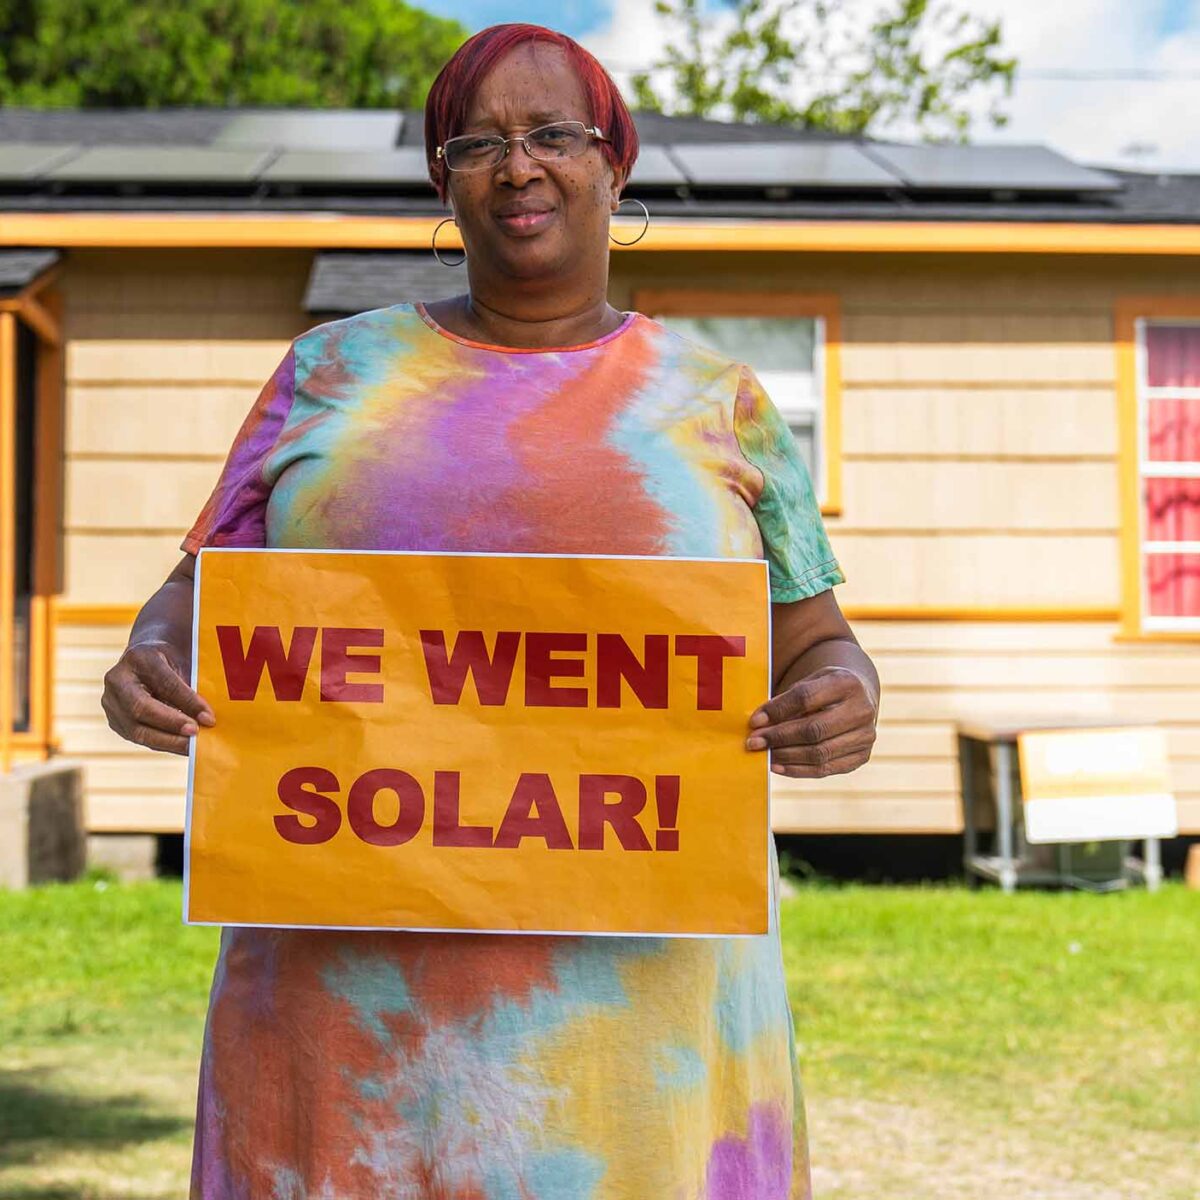 Woman holding "We went solar!" sign, standing in her backyard. Solar panels on a house's rooftop is visible in the background.